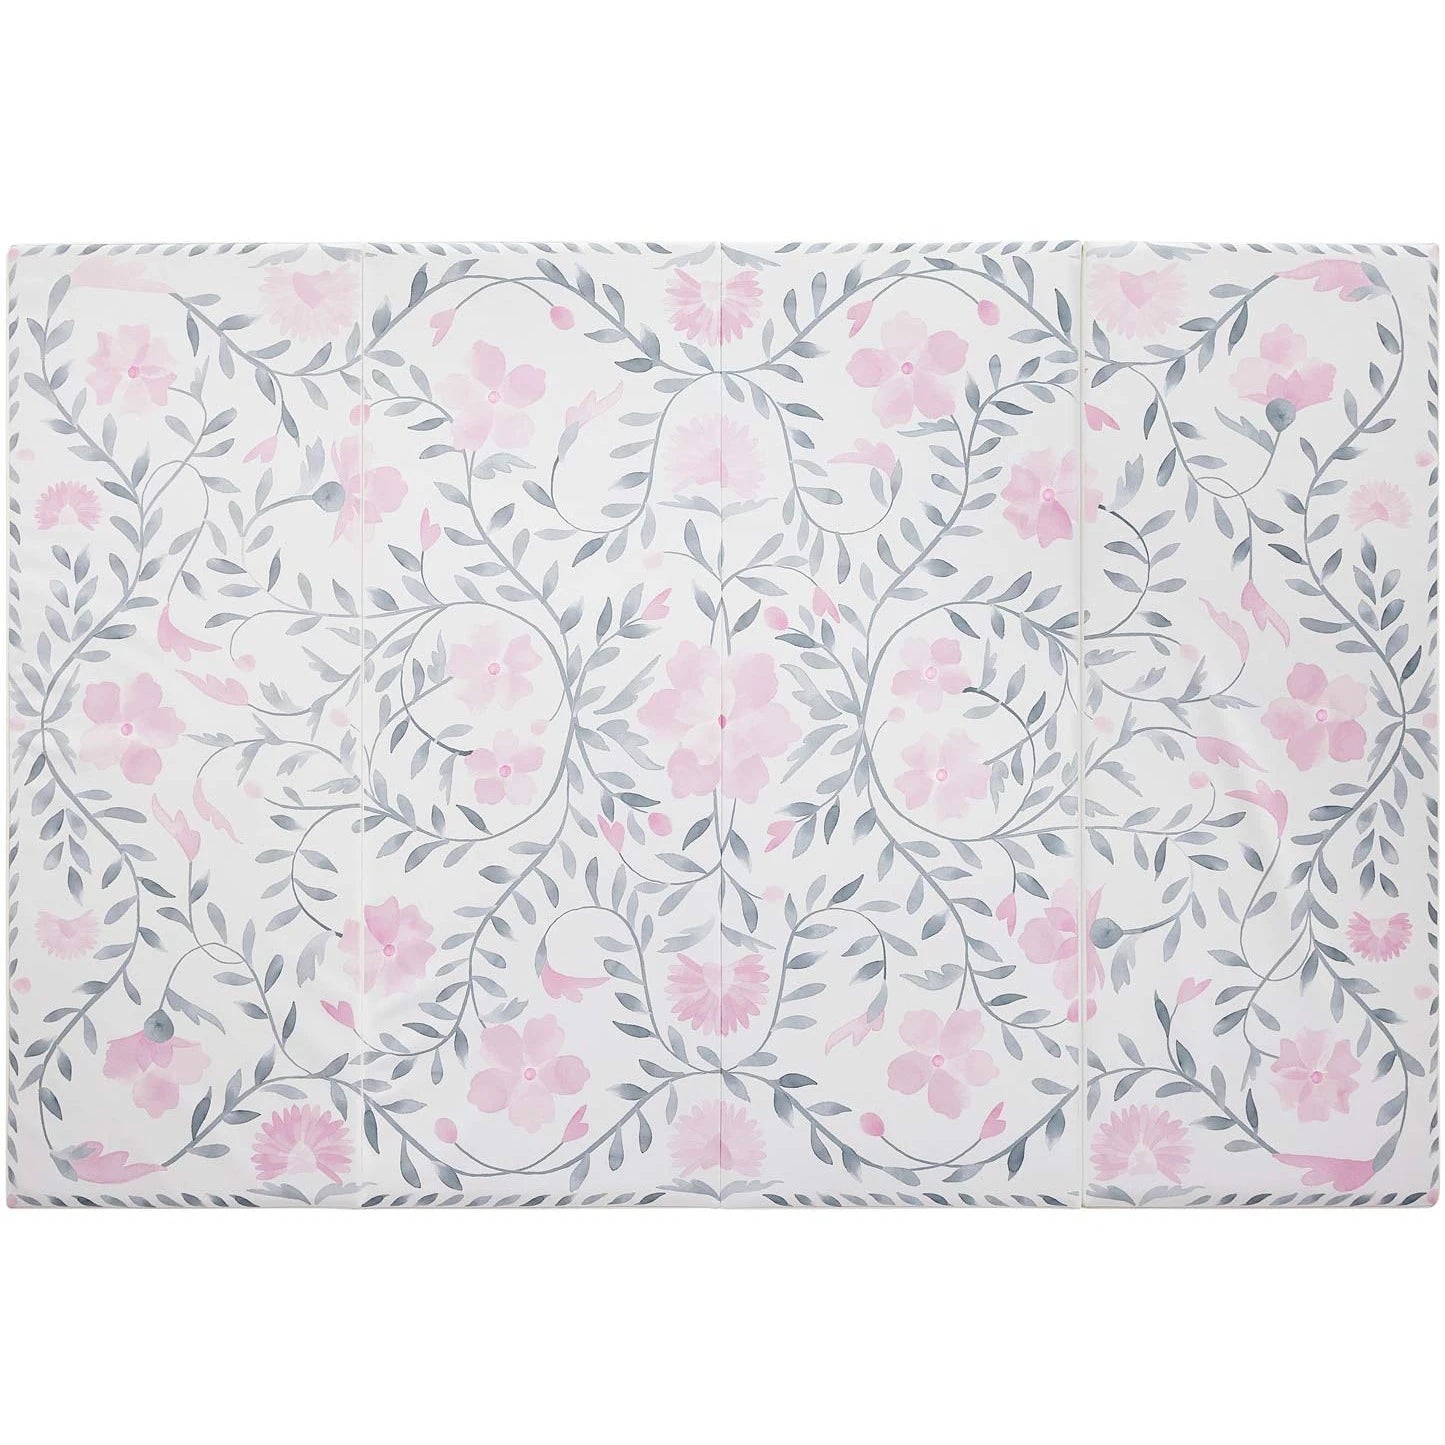 Overhead image of size 4x6 Faye Macaron gray and pink floral print tumbling mat